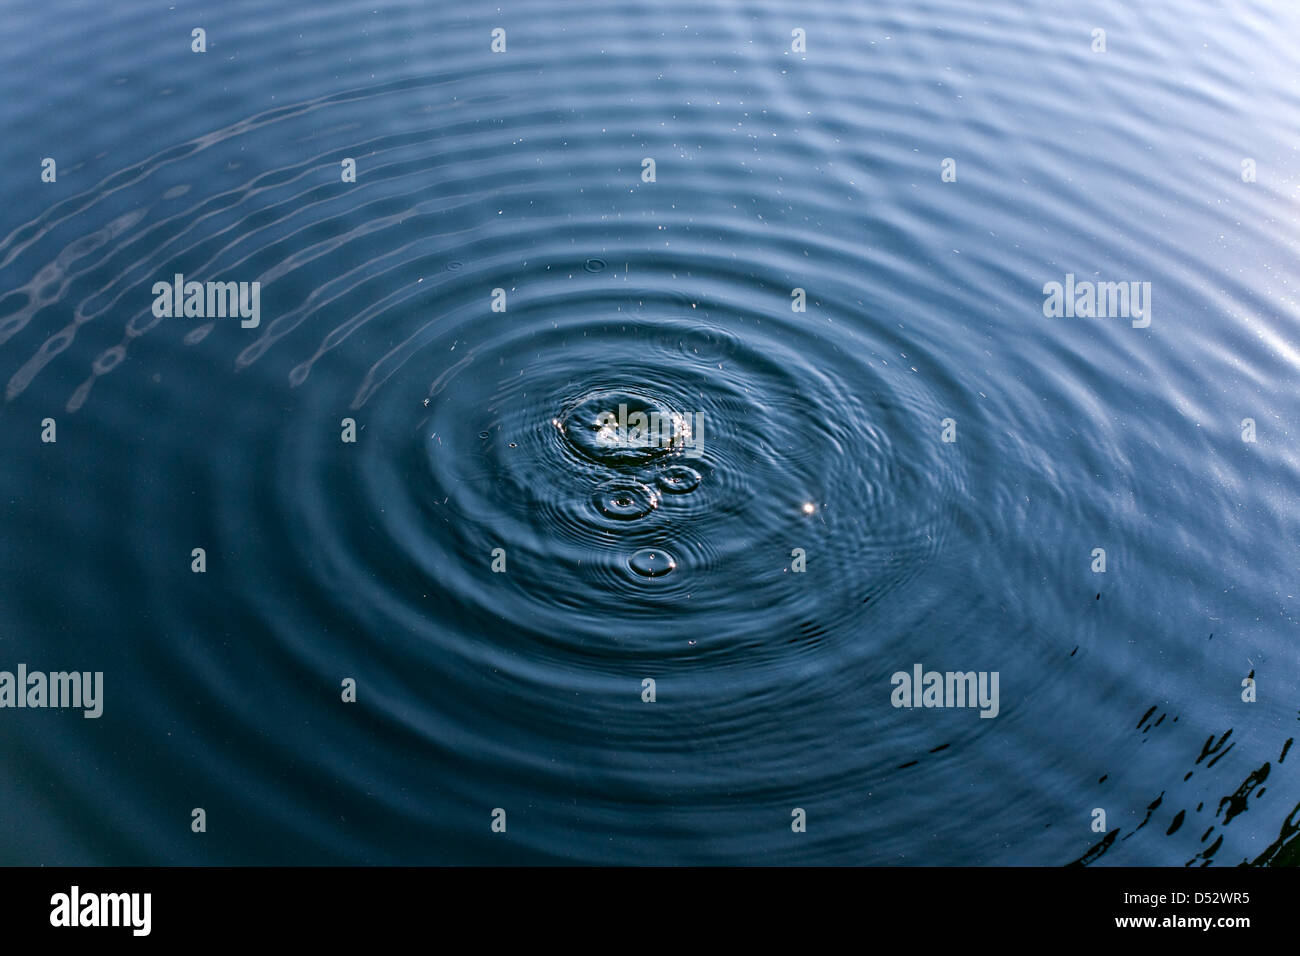 Water Droplets and Ripples Stock Photo